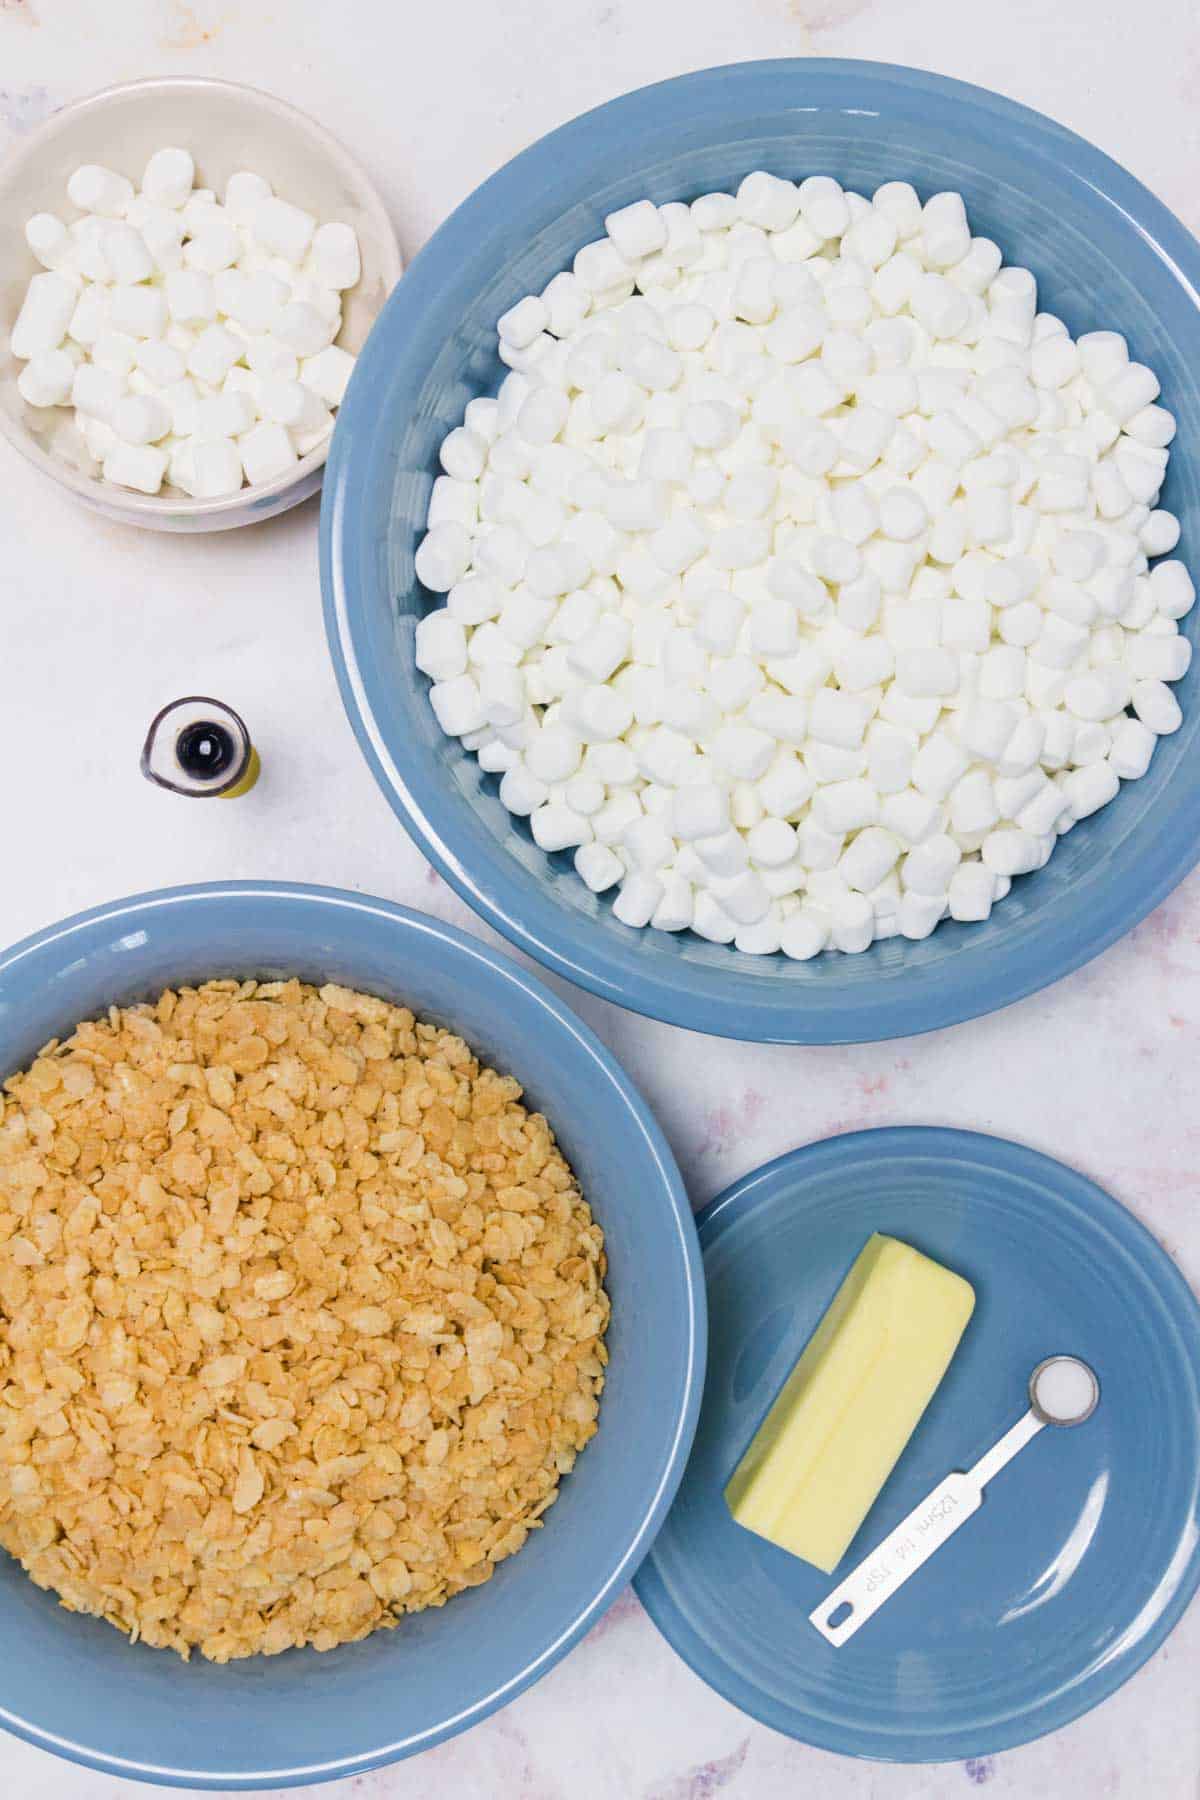 The ingredients for gluten-free rice krispies treats.